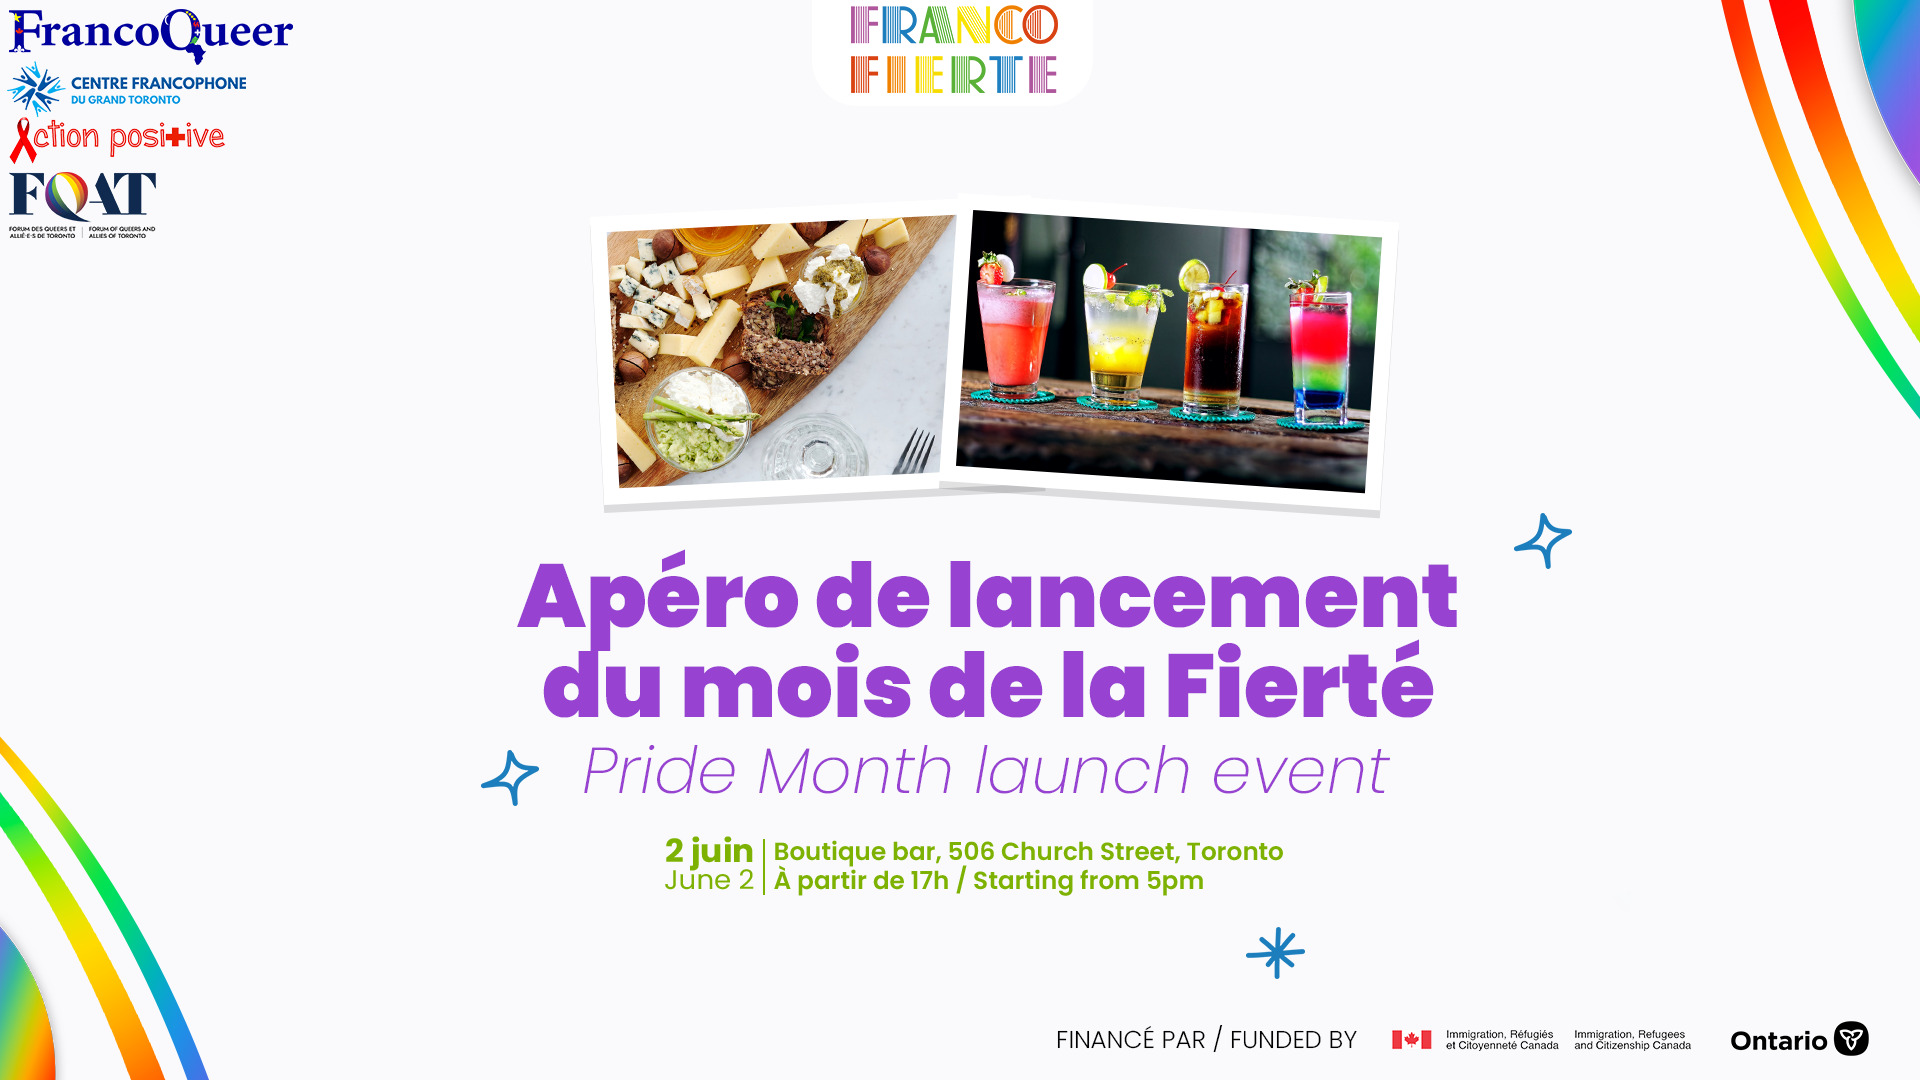 FrancoQueer - Pride Month Launch Event